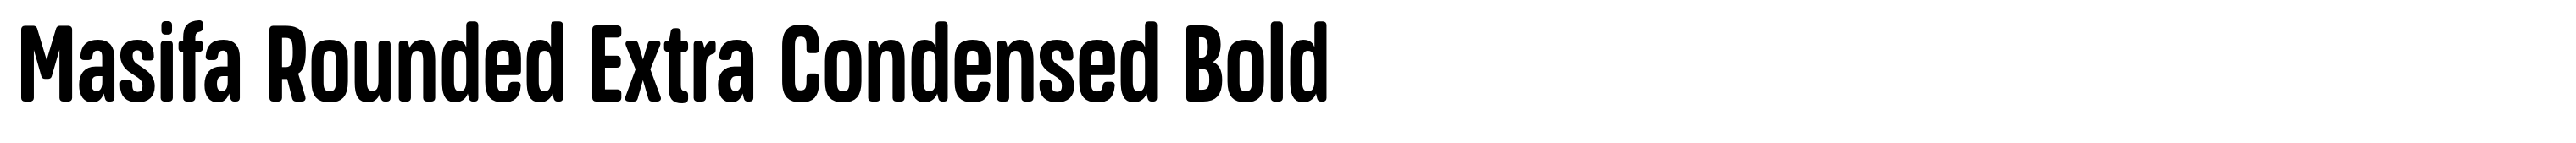 Masifa Rounded Extra Condensed Bold